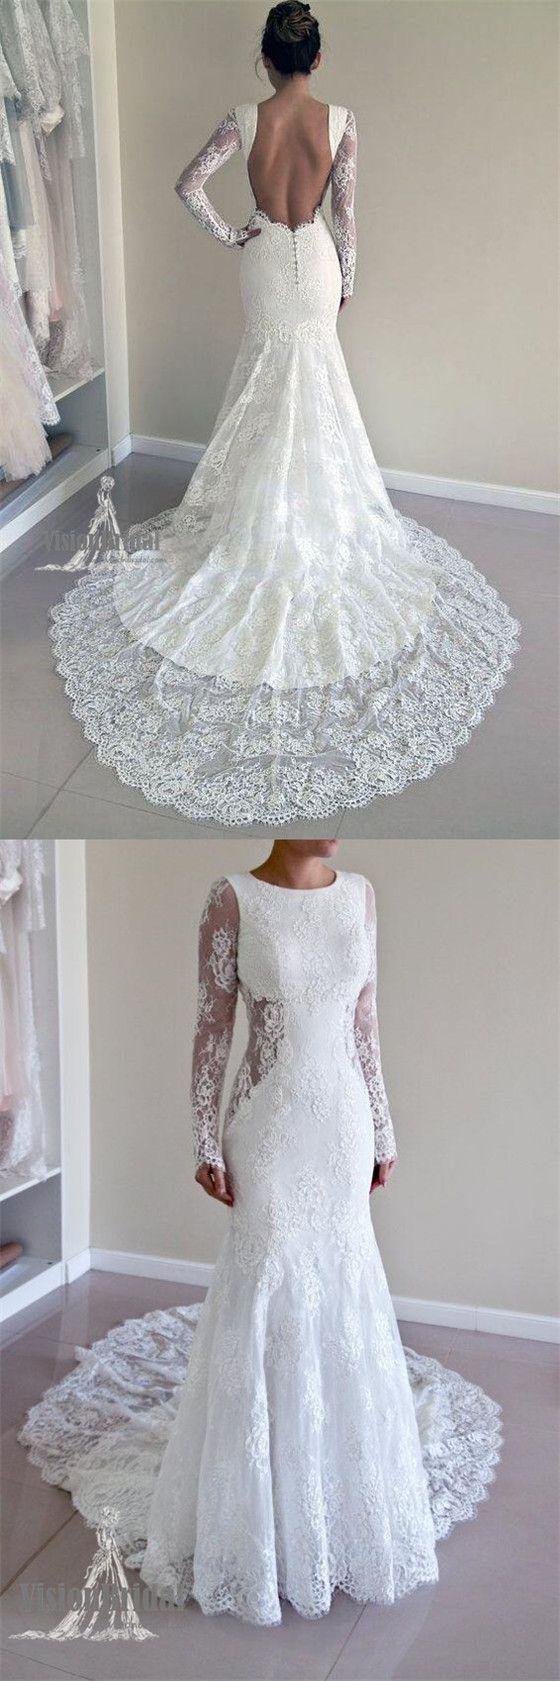 Wedding - Attractive Round Neck Long Sleeves Open Back Lace Wedding Dress With Trailing, Wedding Dress, VB0686